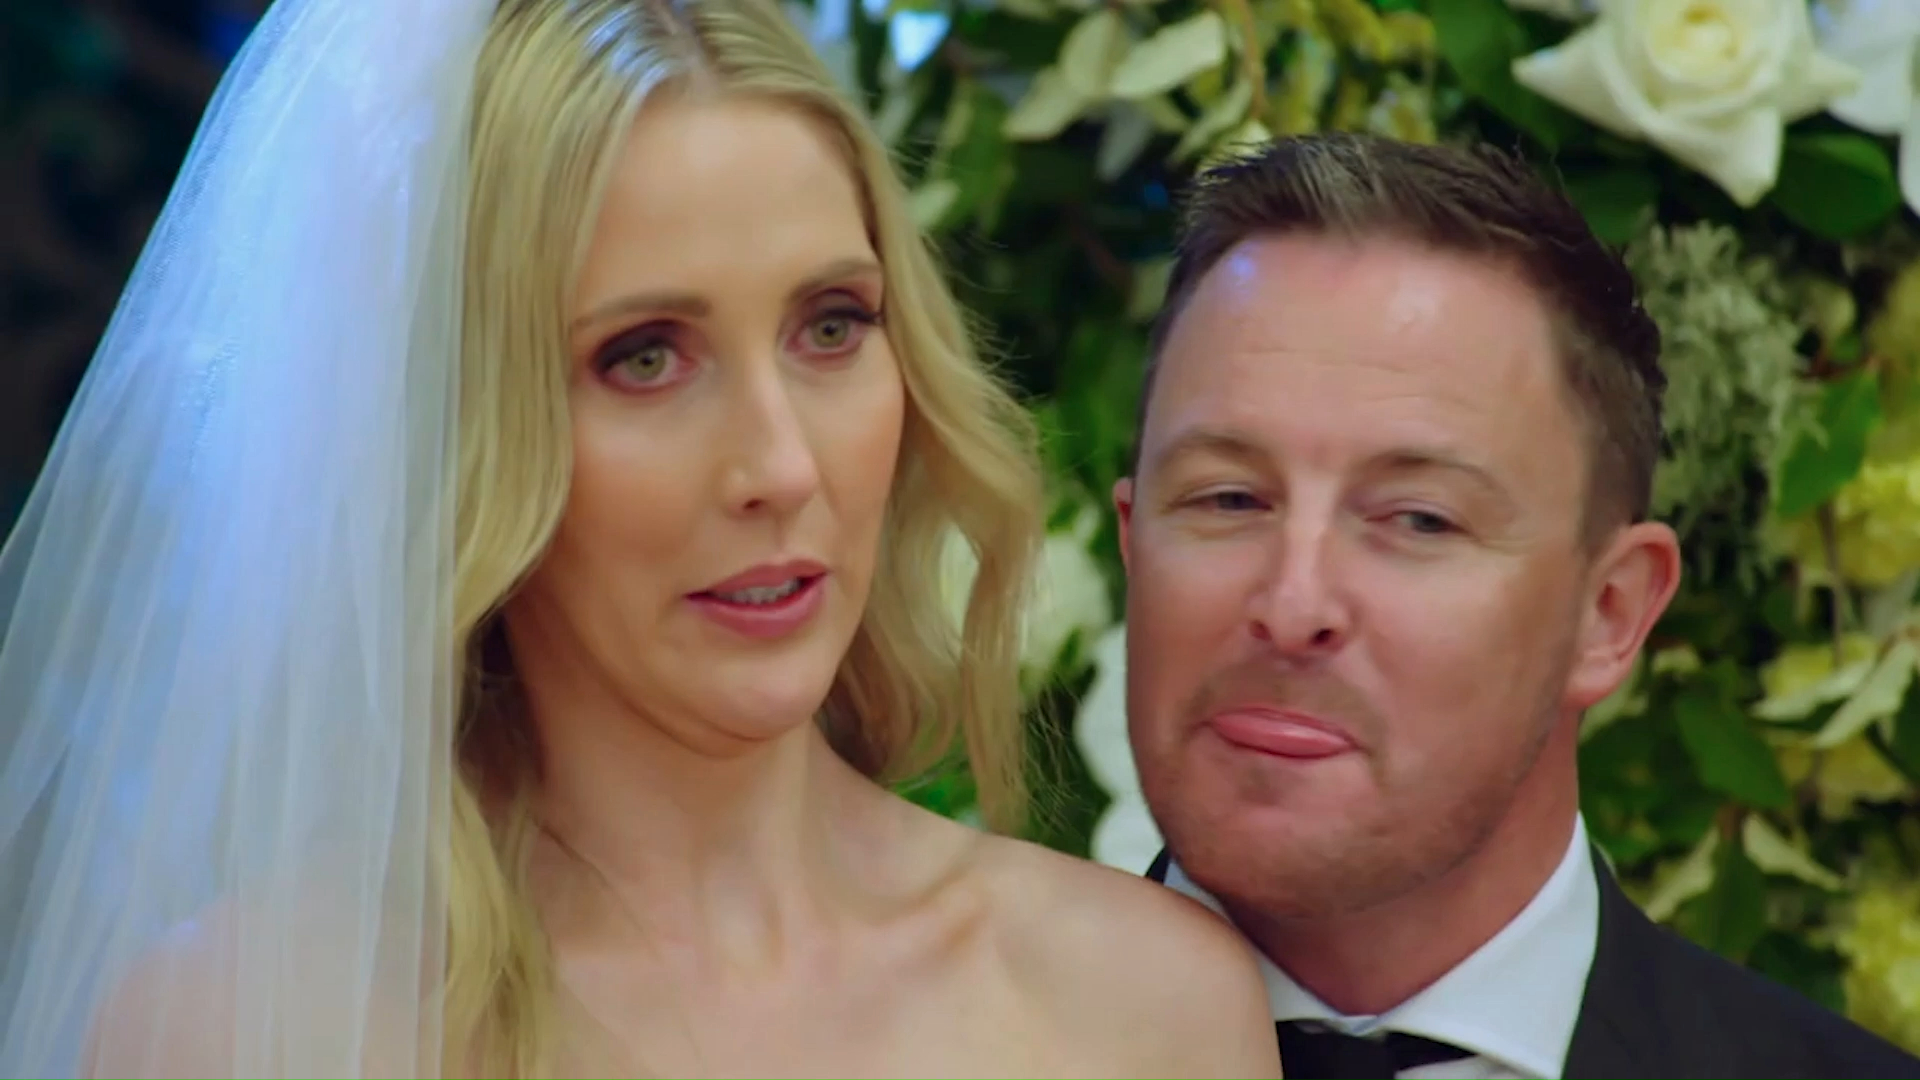 The most awkward moments on Married At First Sight